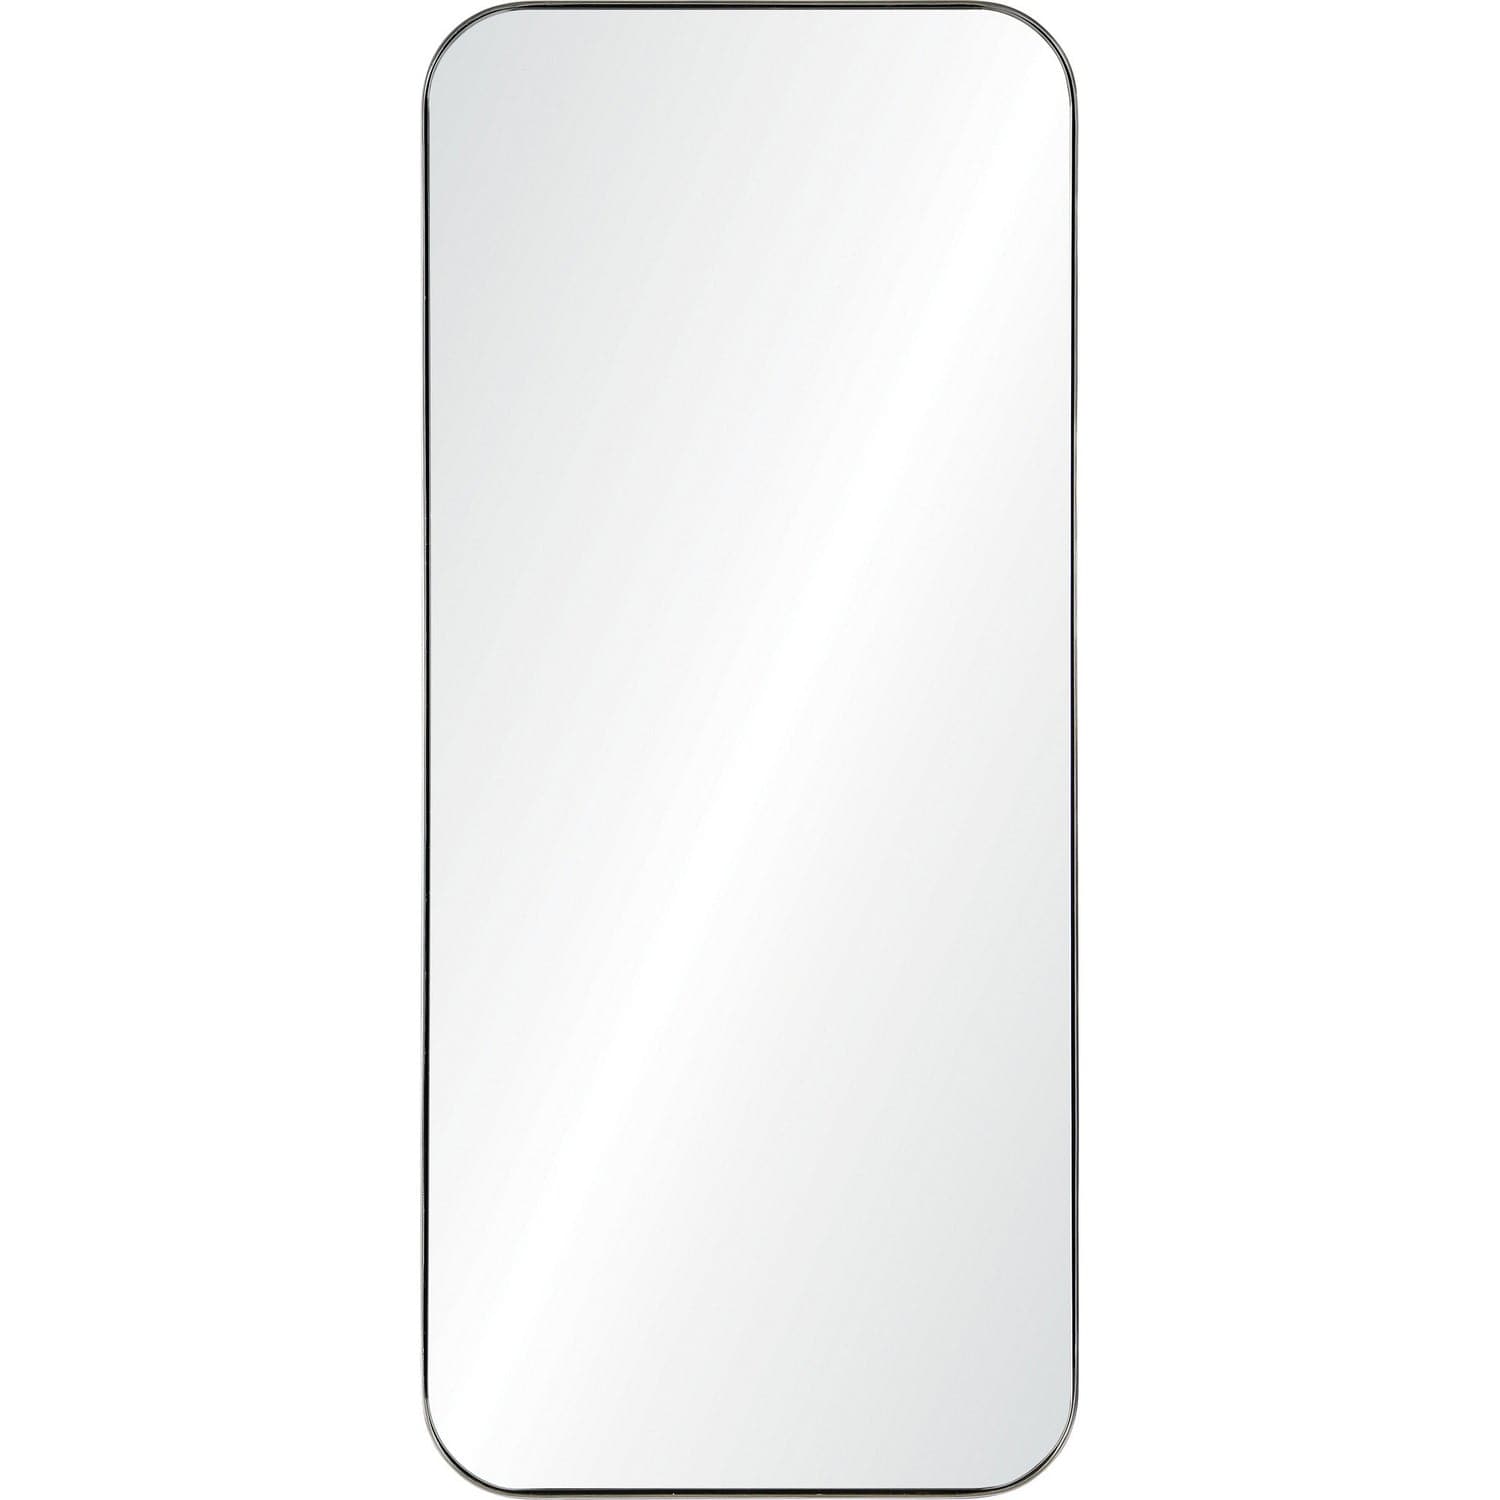 Renwil - MT2360 - Mirrors/Pictures - Mirrors-Rect./Sq.